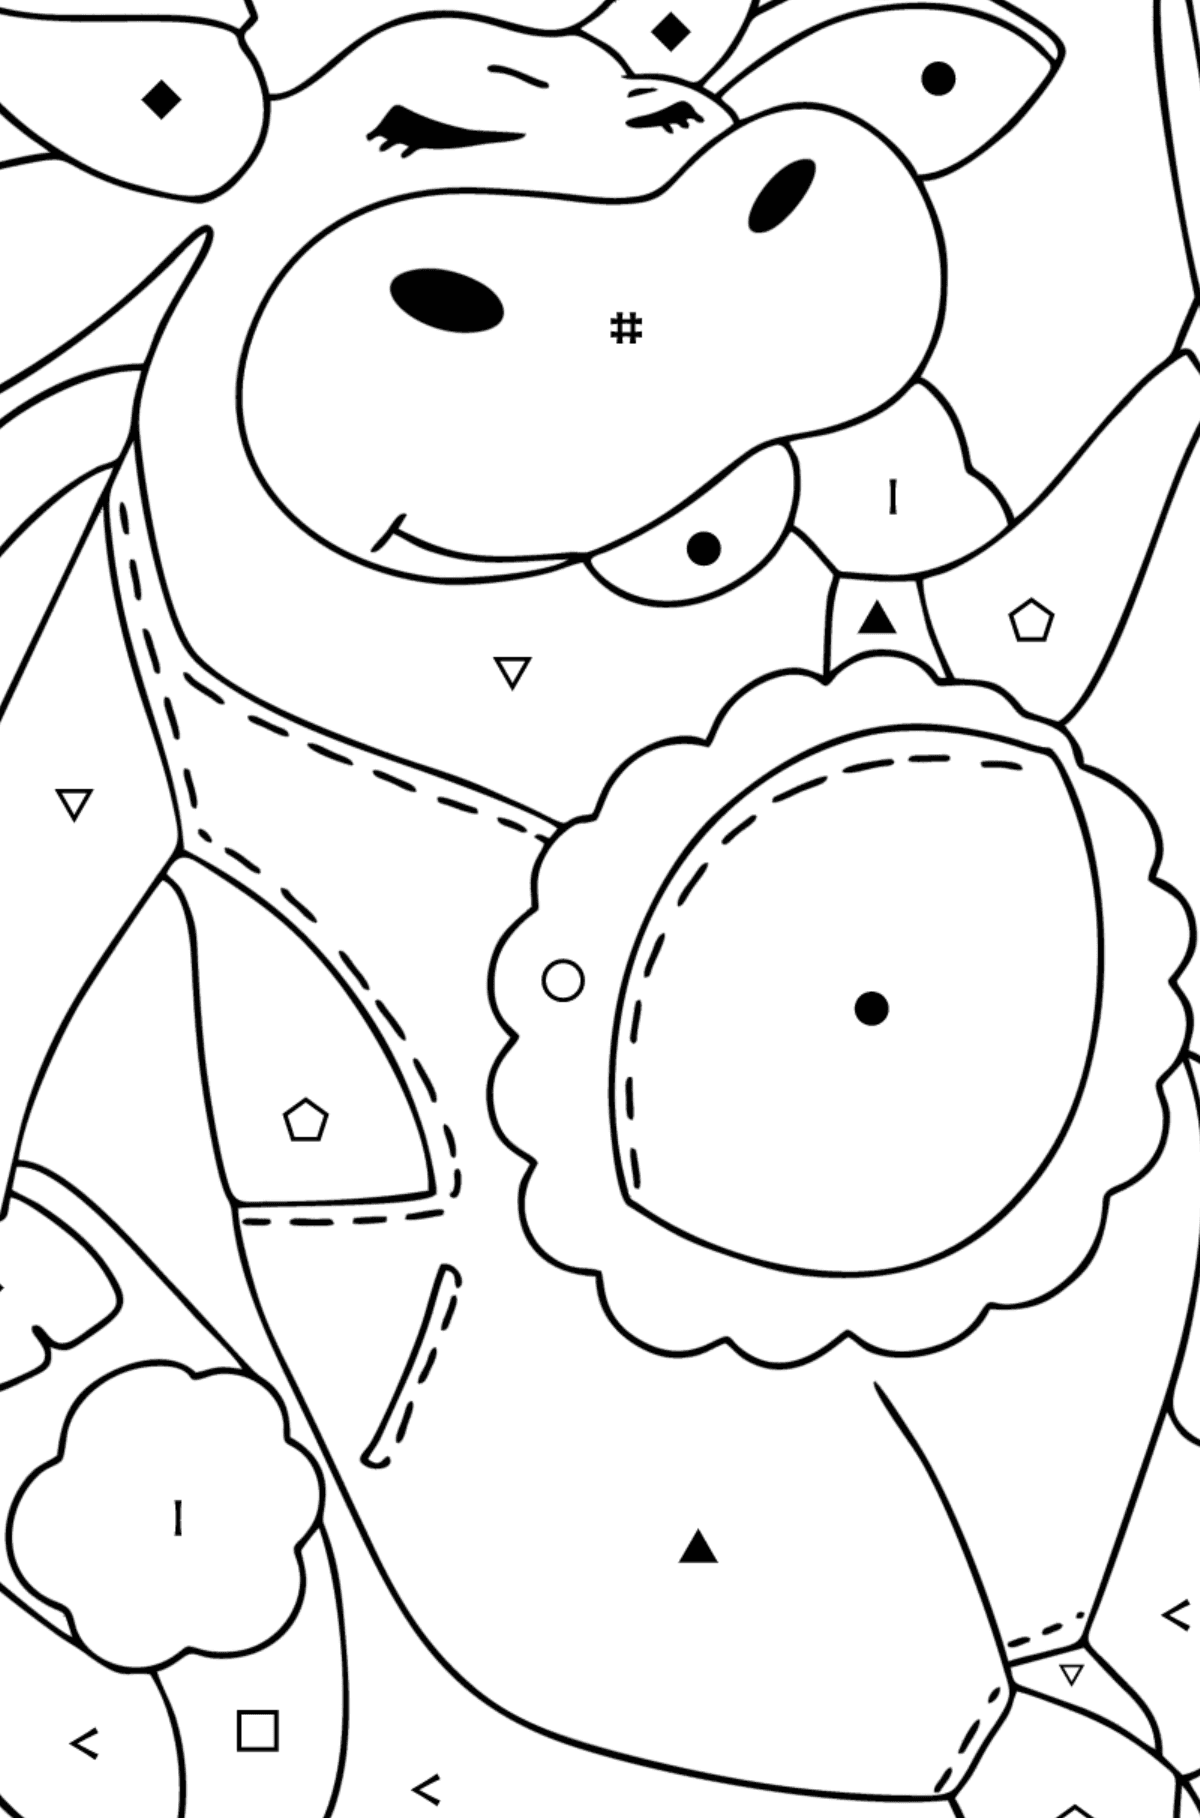 Funny cow coloring page - Coloring by Symbols and Geometric Shapes for Kids